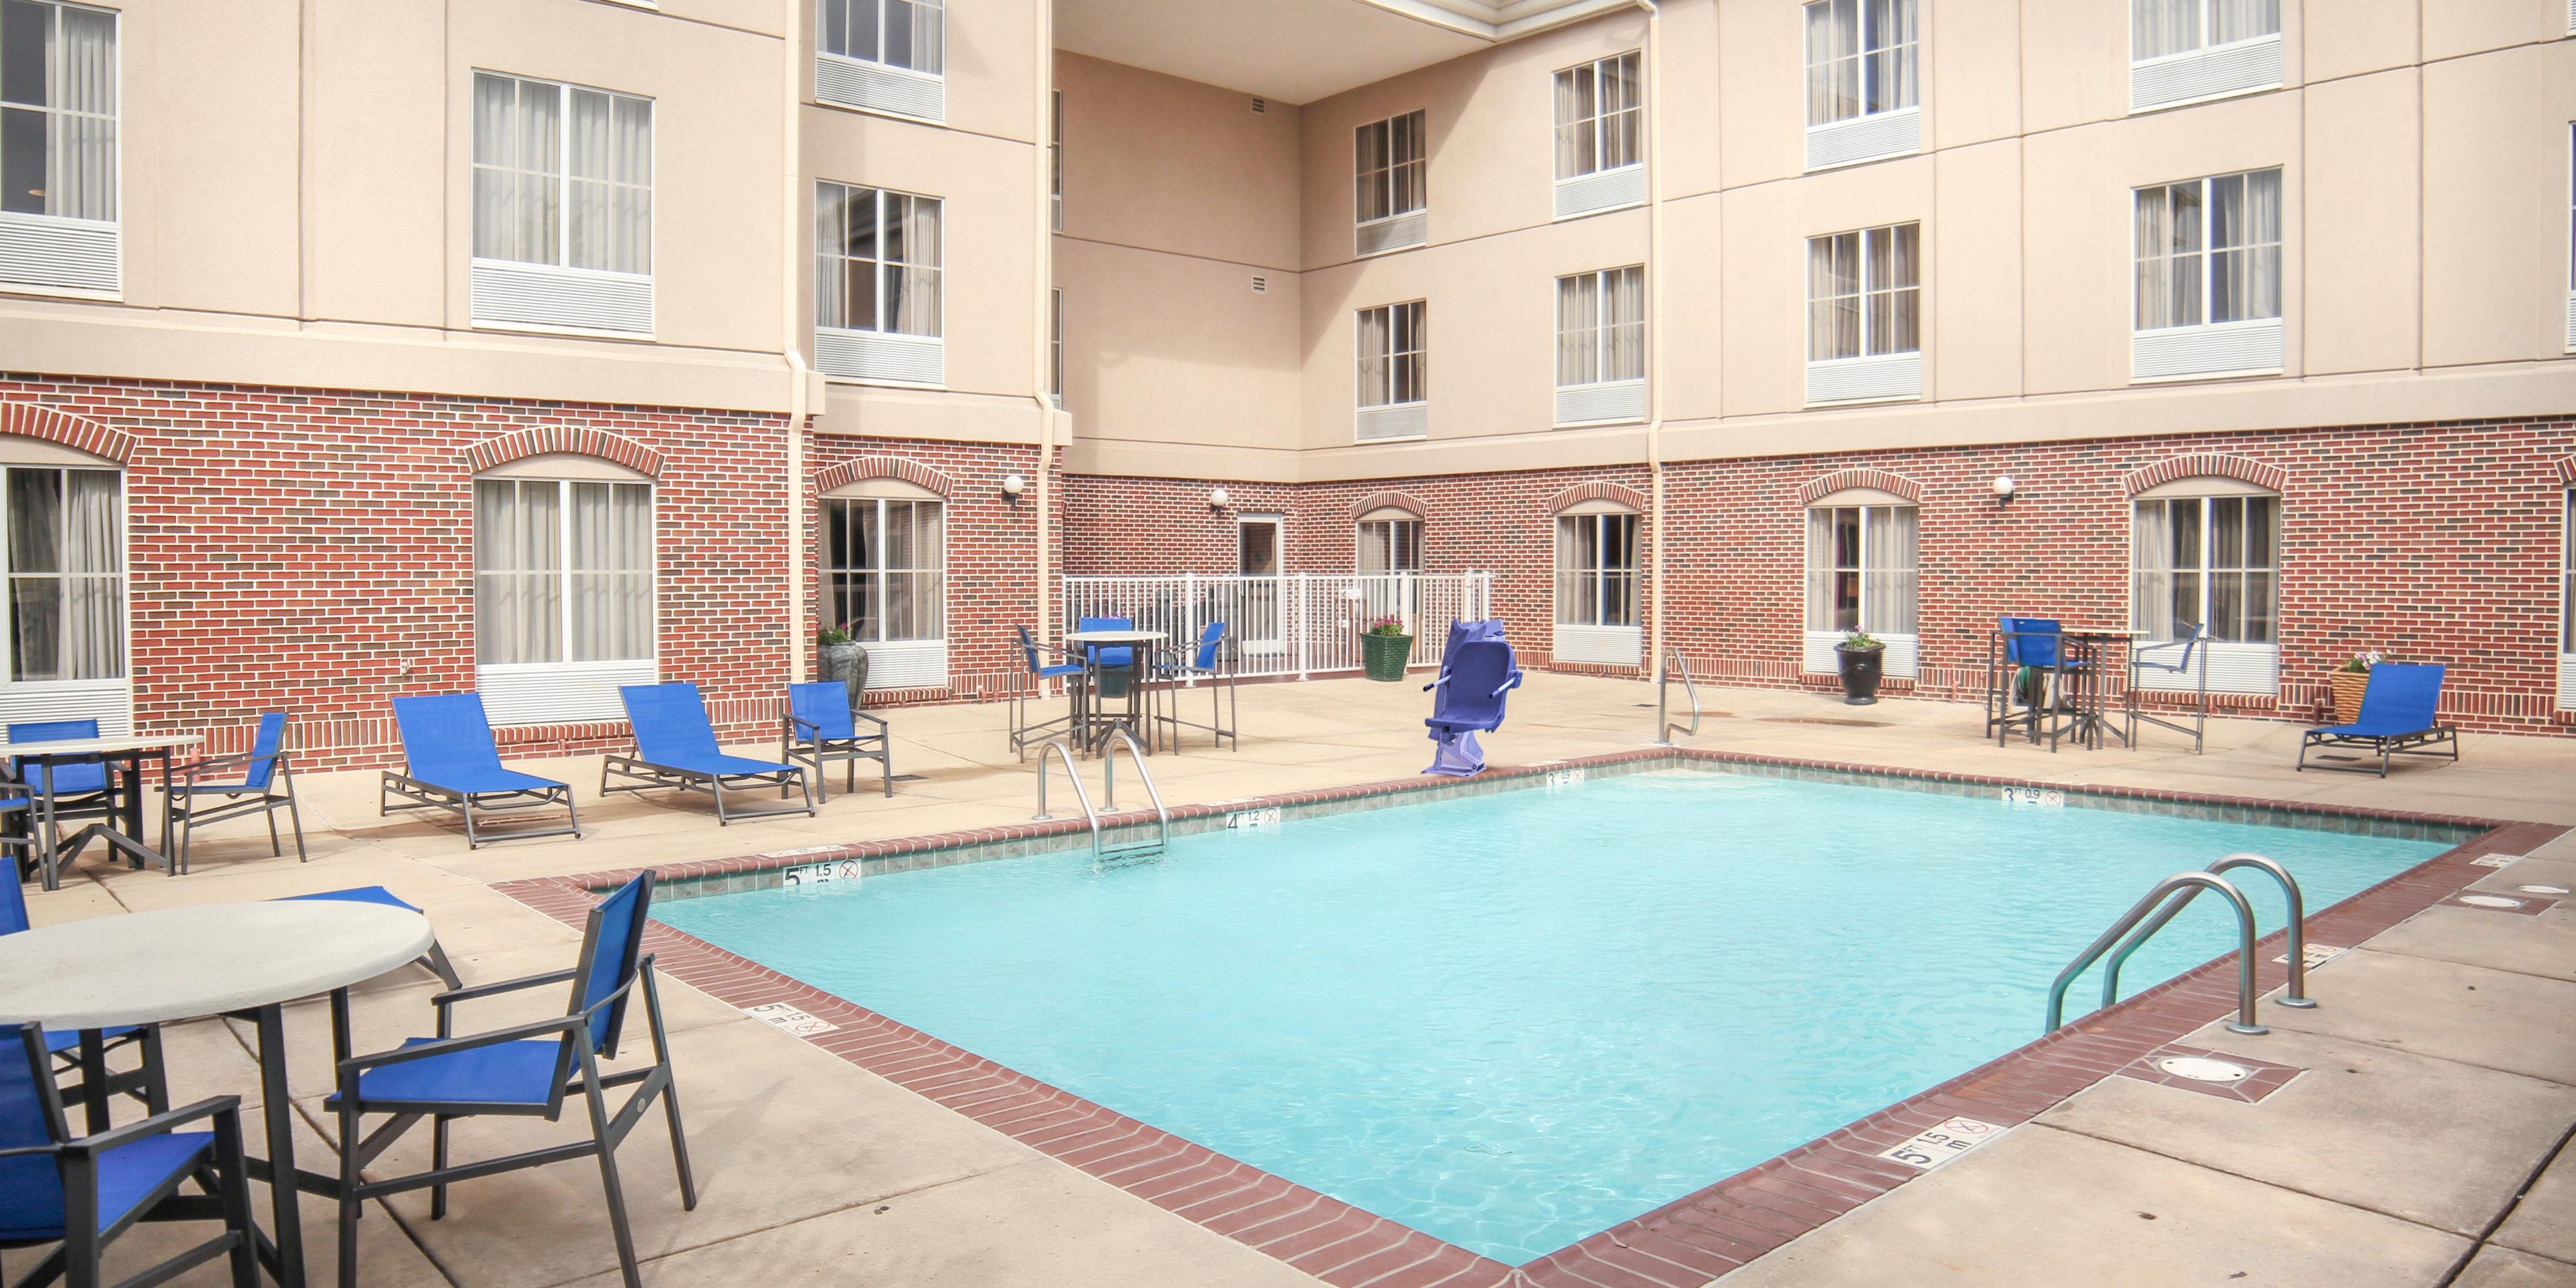 After a busy day, grab a towel and unwind beside our sparkling, inviting pool.  Enjoy a cool, refreshing pick-me up courtesy of your friends at the Holiday Inn Express & Suites Vicksburg.
